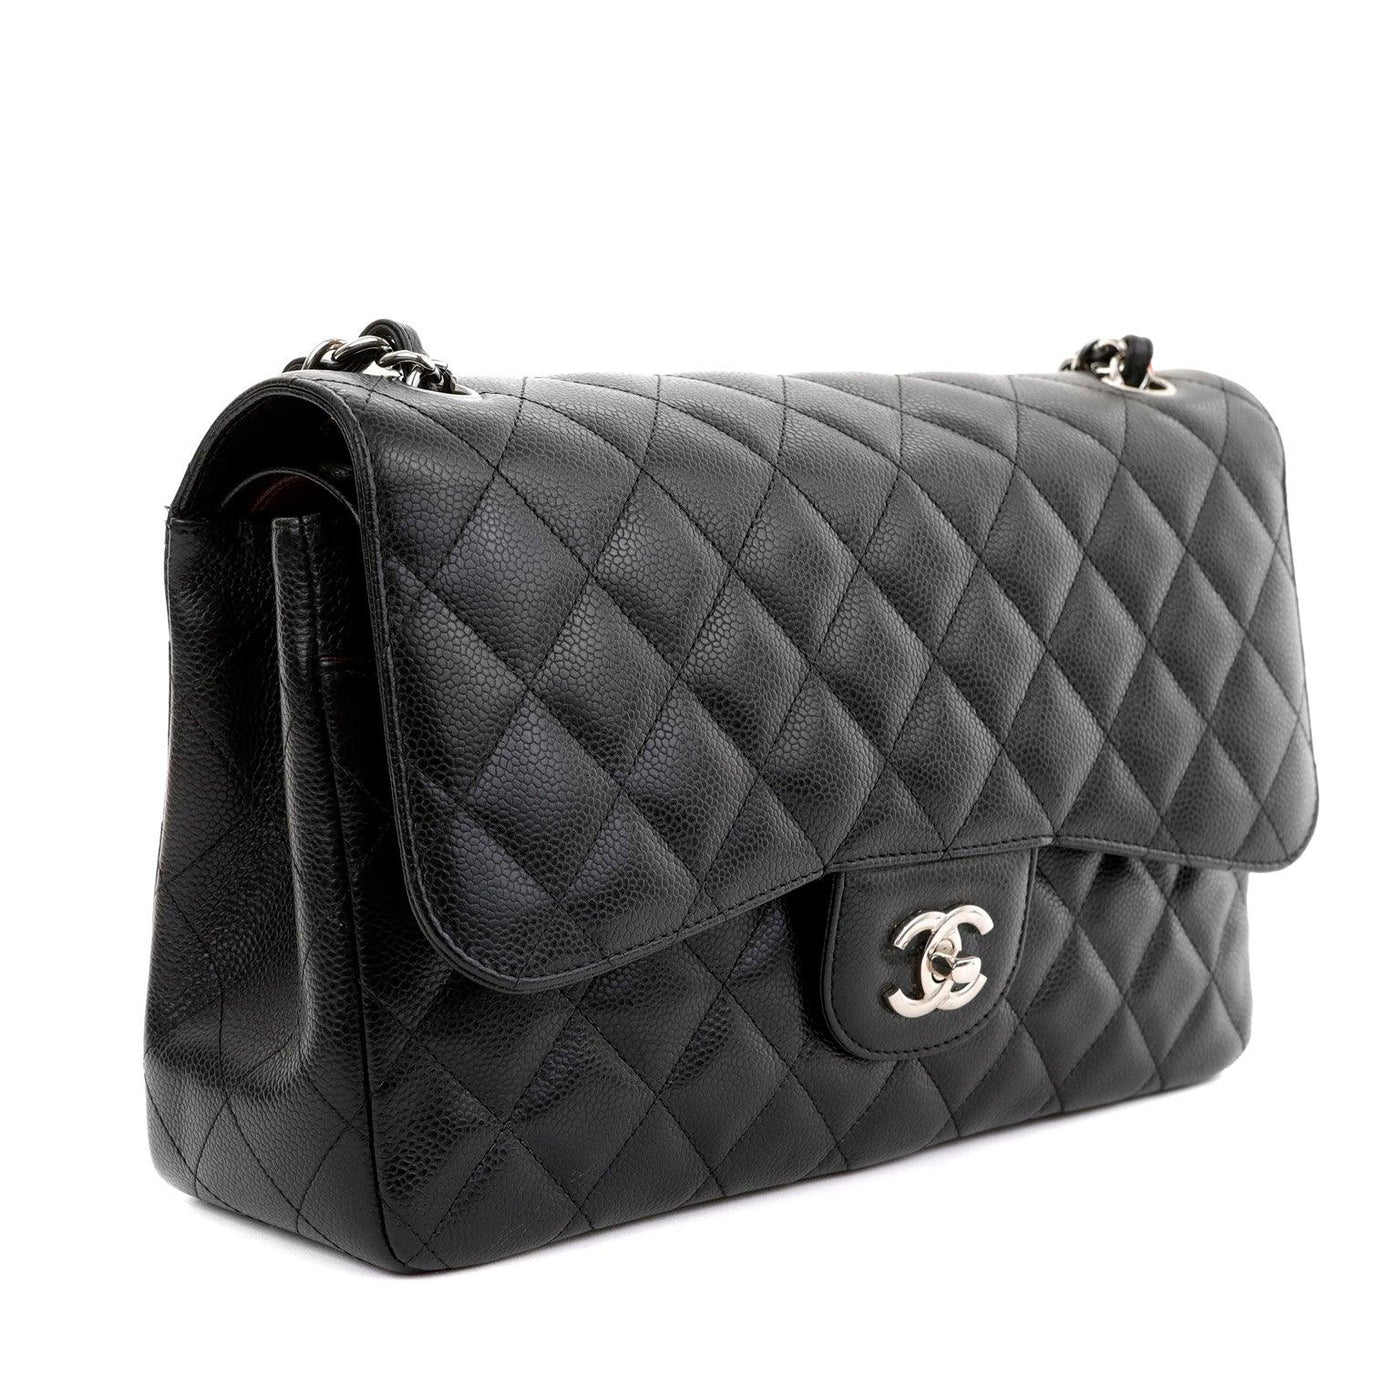 Chanel Black Caviar Jumbo Classic Flap with Silver Hardware - Only Authentics